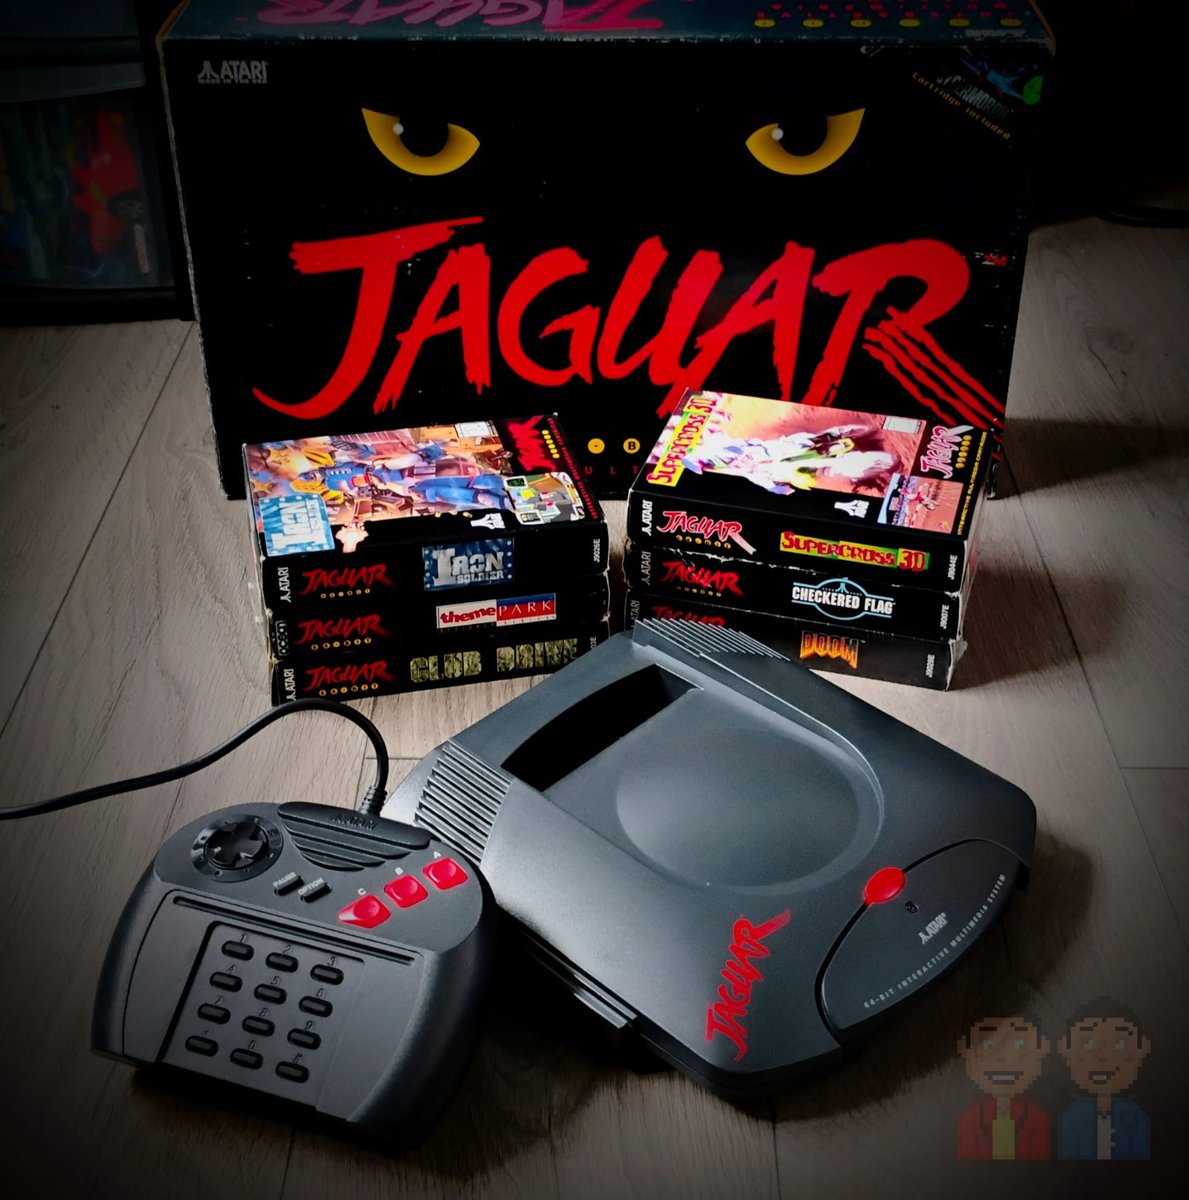 This #Thursday we feature #Atari's last hurrah in the console business, with its '64-bit' #Jaguar! Though Powerful, hardware was often underutilised & it sadly failed to capture the gaming public Any love? #GamersUnite #RETROGAMING #retrogamer #retrogames #Retro